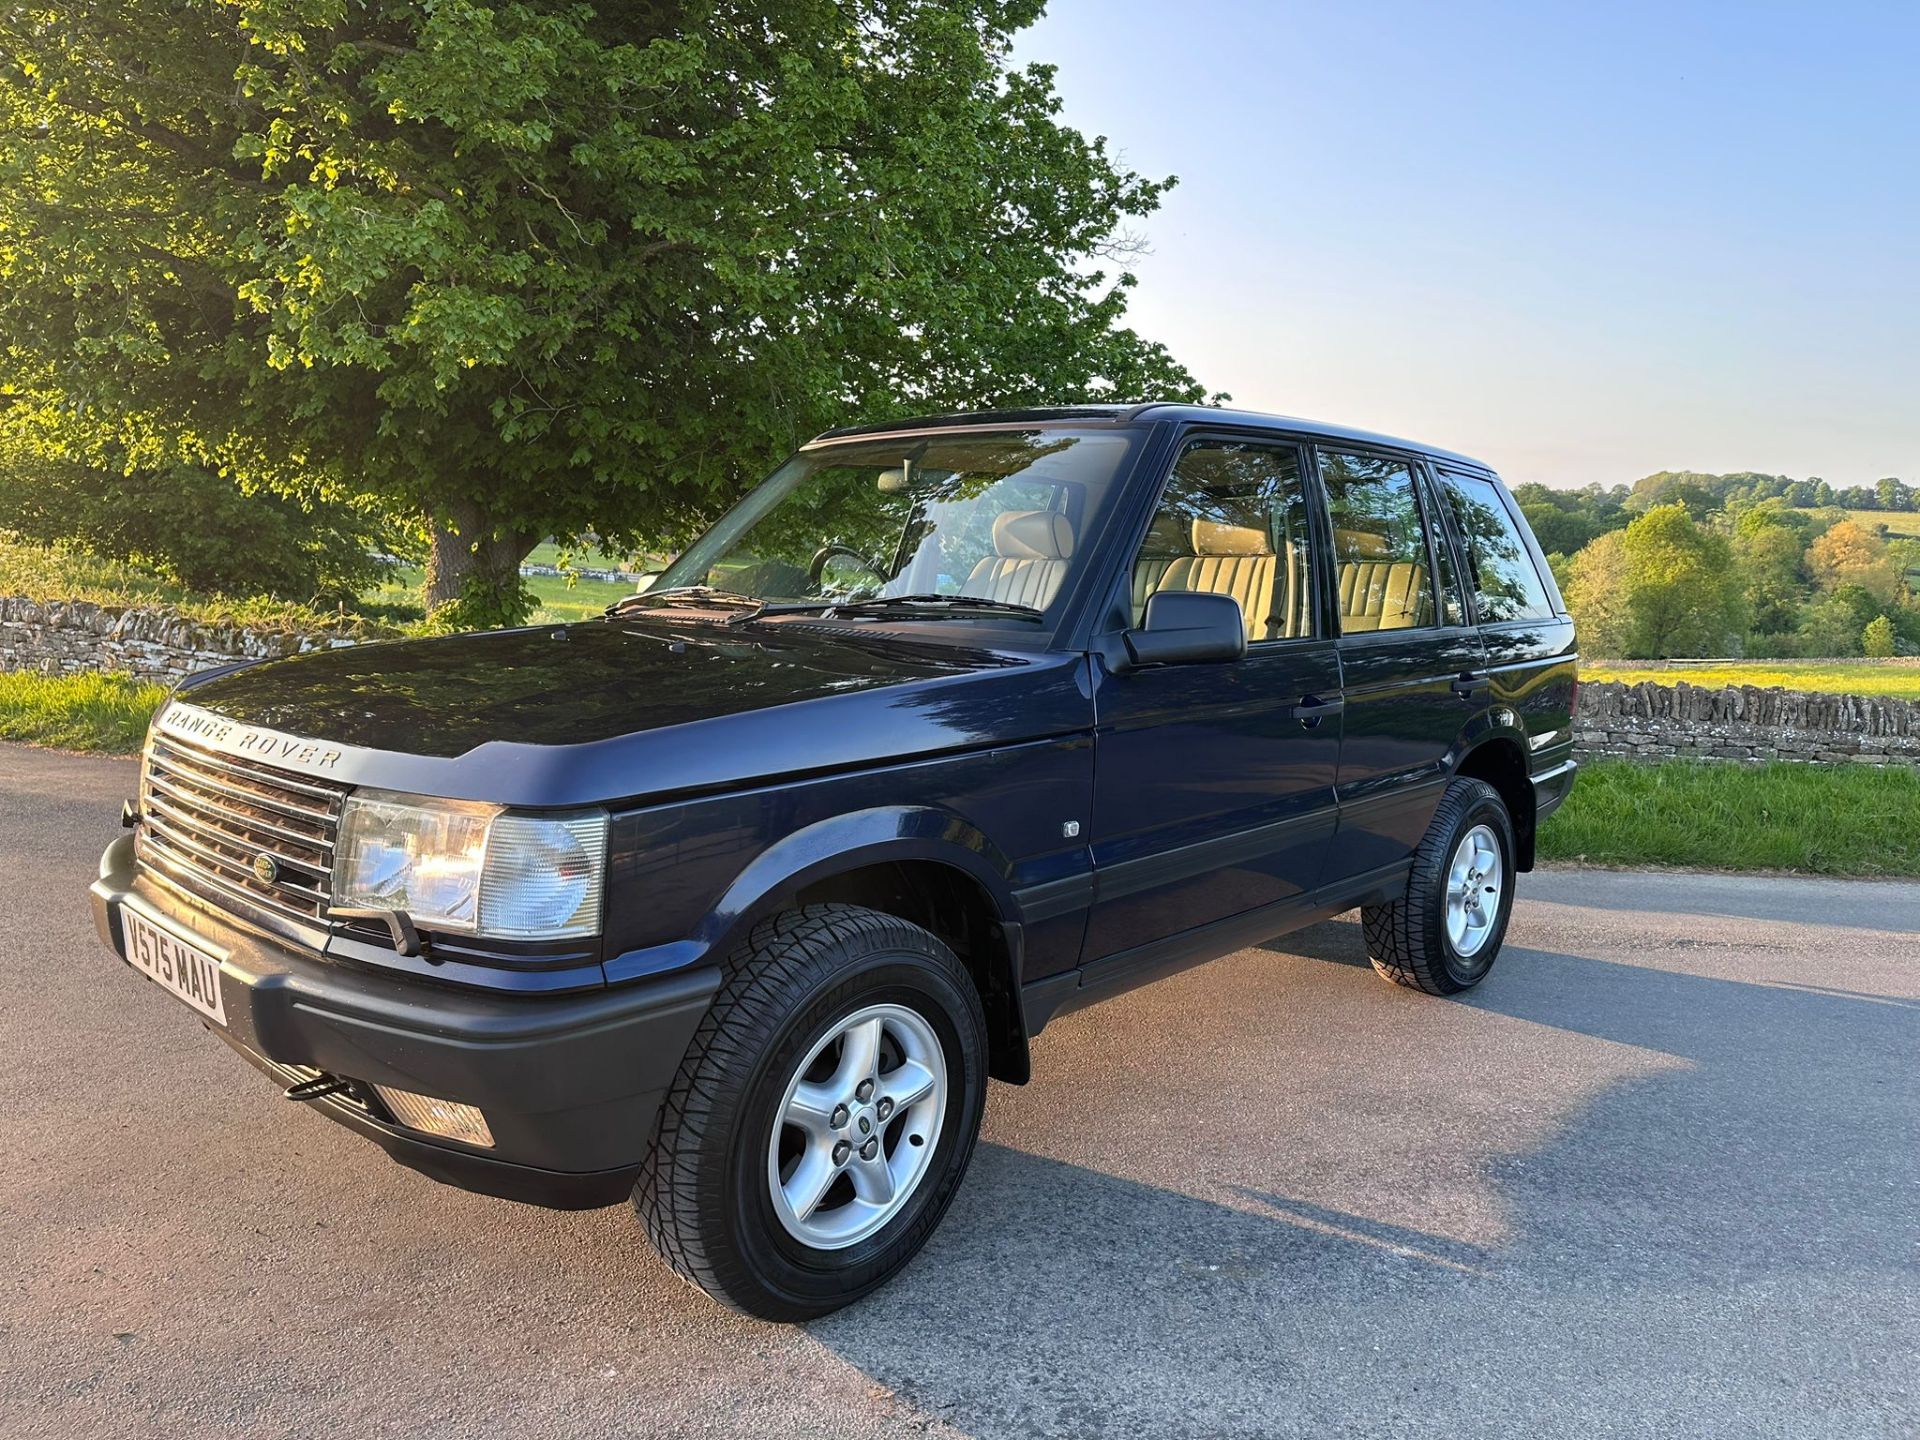 1999 RANGE ROVER VOGUE 4.6 V8 P38 (THOR ENGINE) - 59K MILES FROM NEW - Image 2 of 13